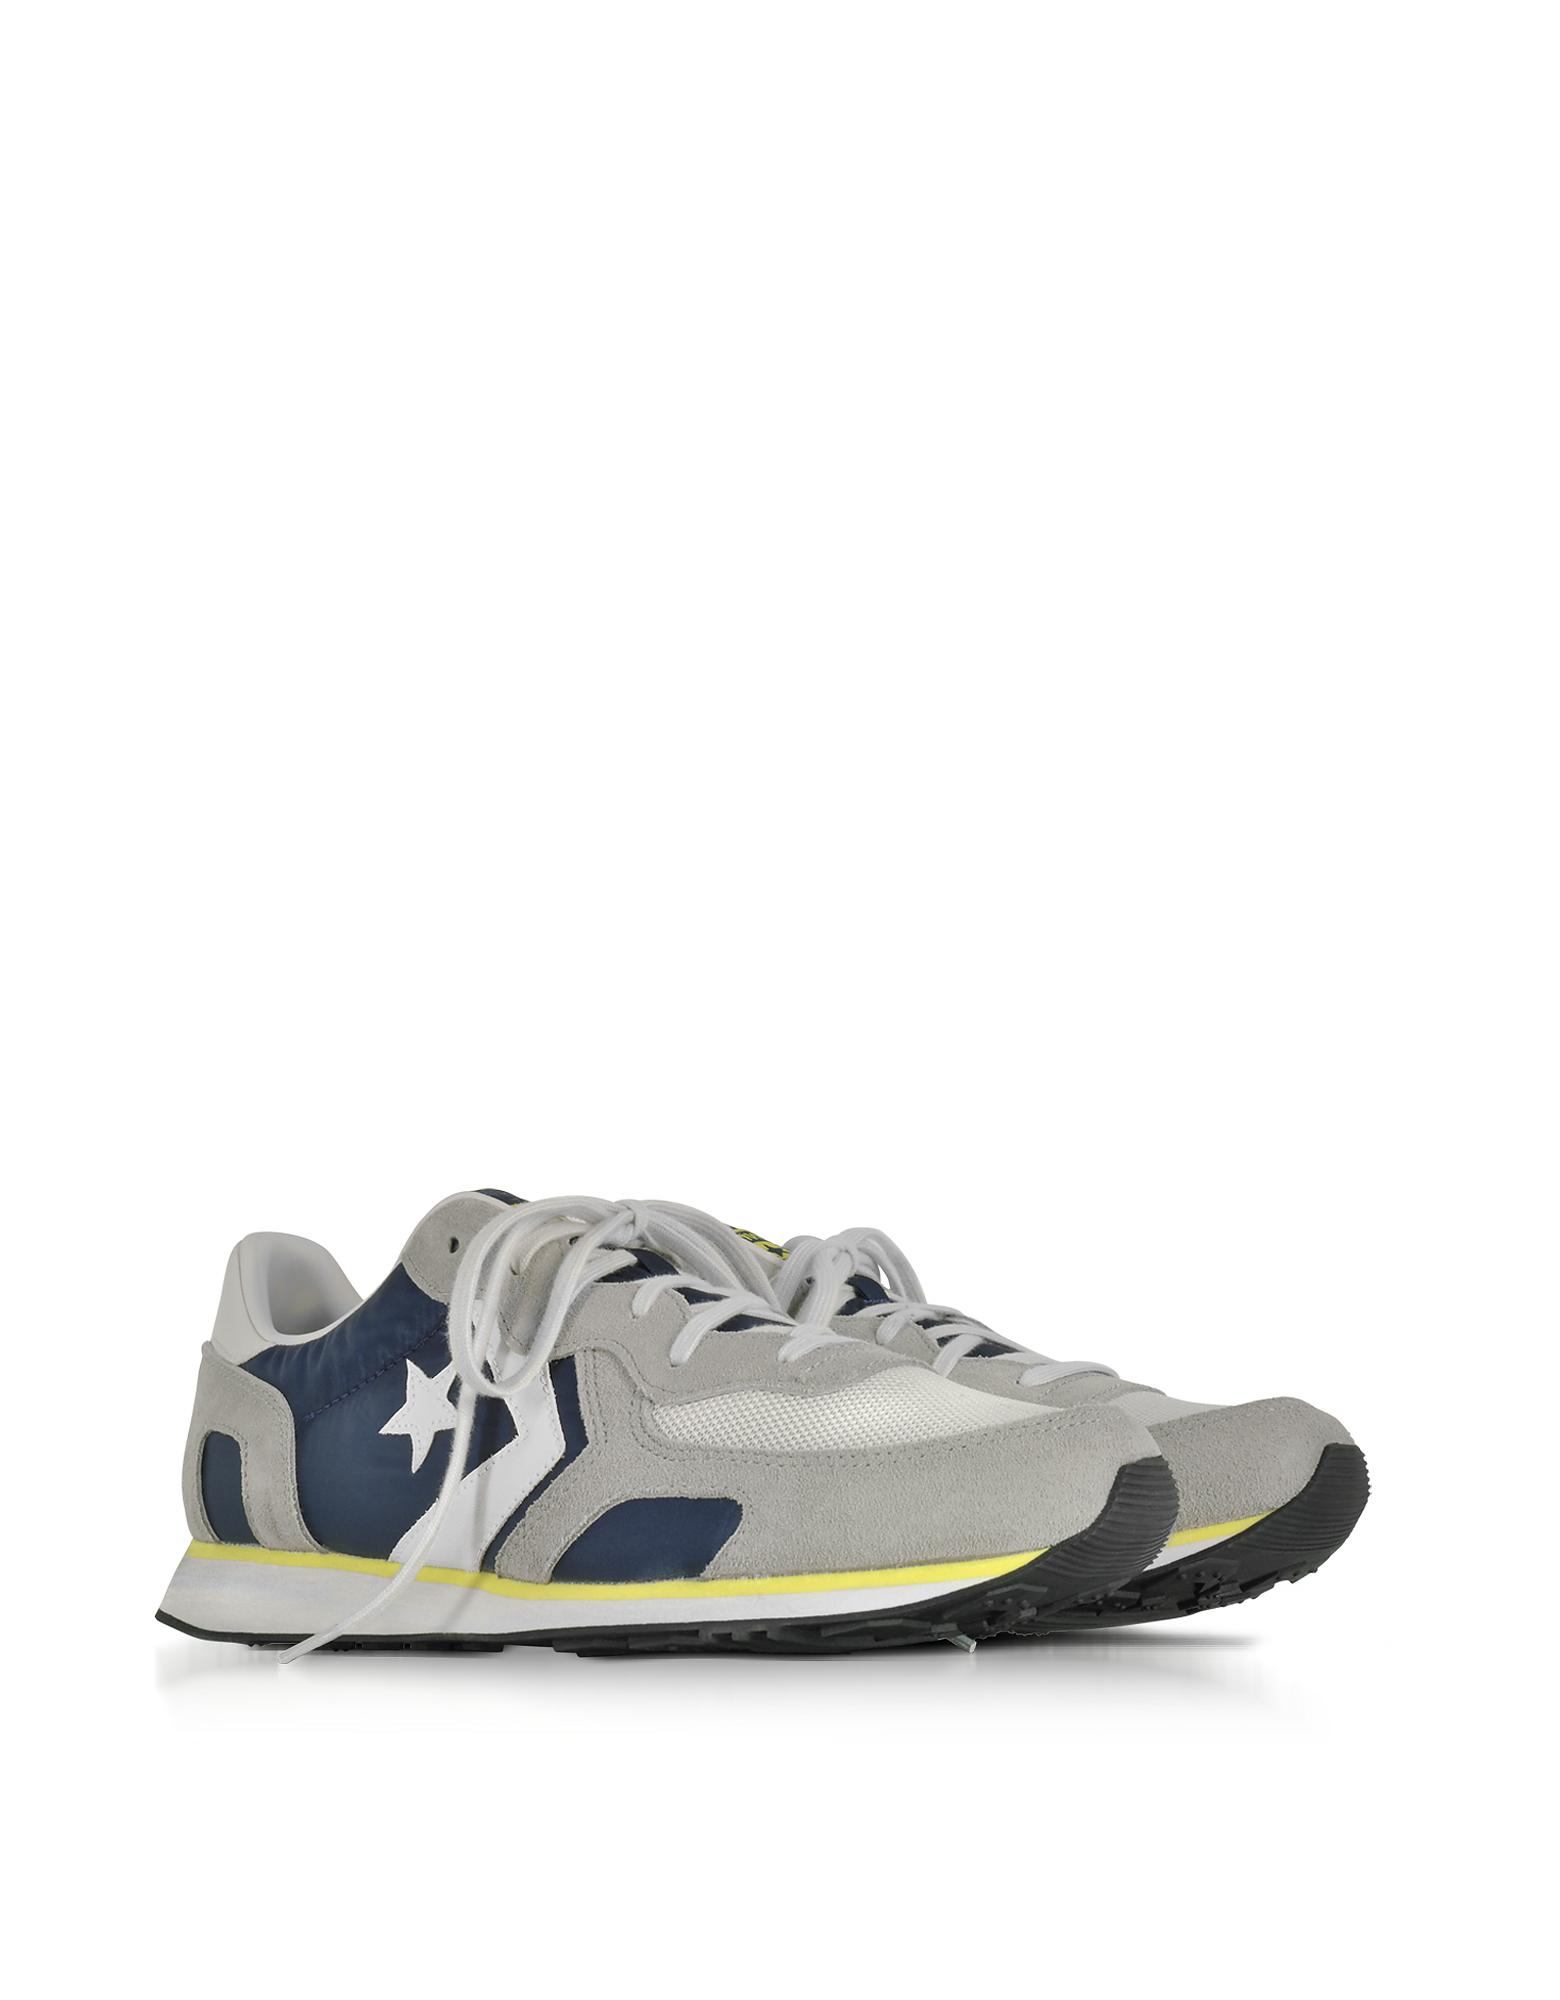 converse auckland racer distressed ox